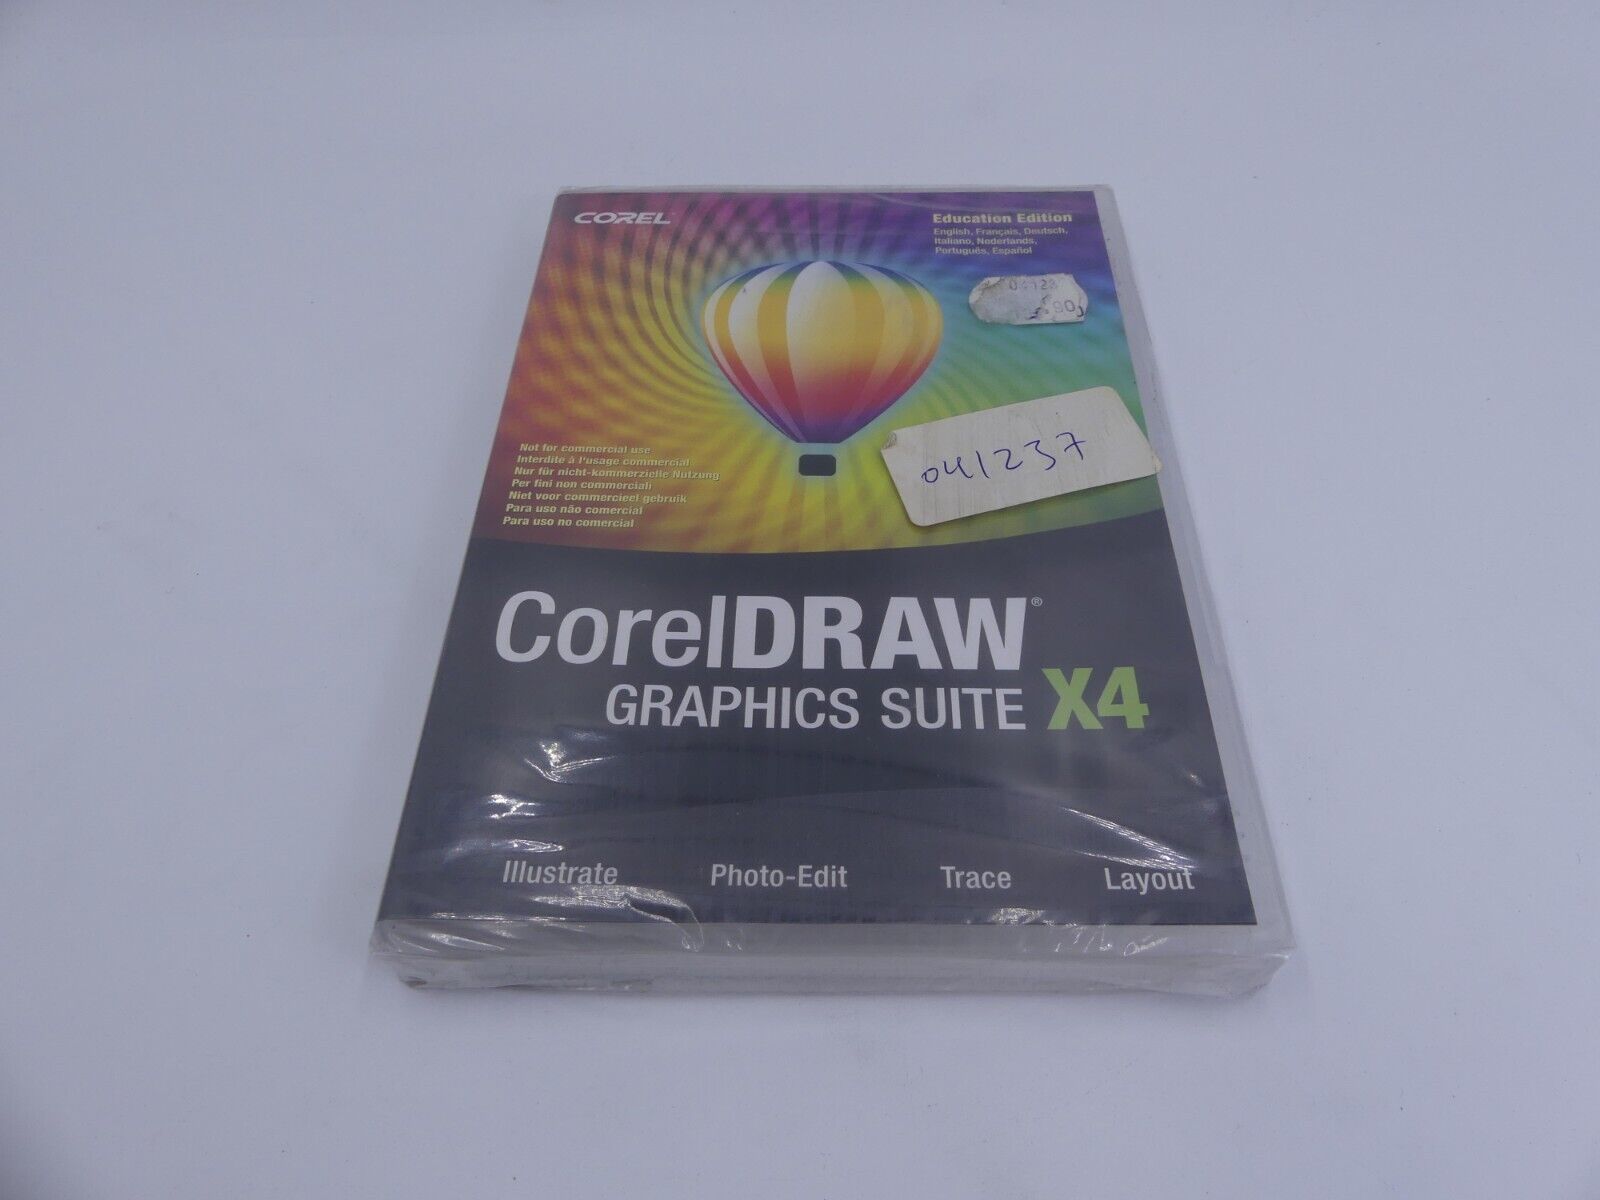 Corel DRAW Graphics Suite X4 EDUCATION EDITION SEALED